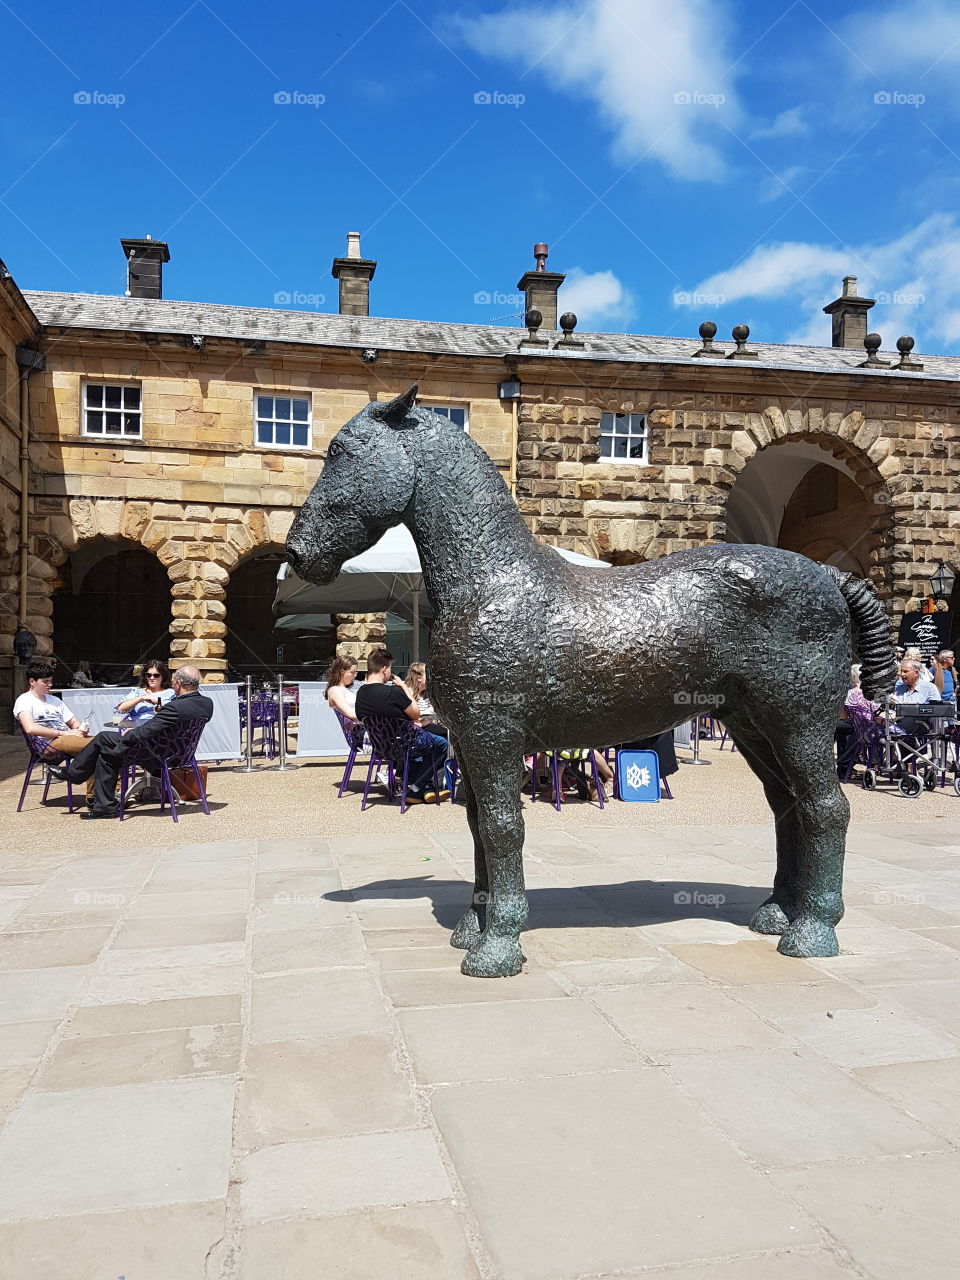 Very large cast iron horse sculpture in a courtyard in England